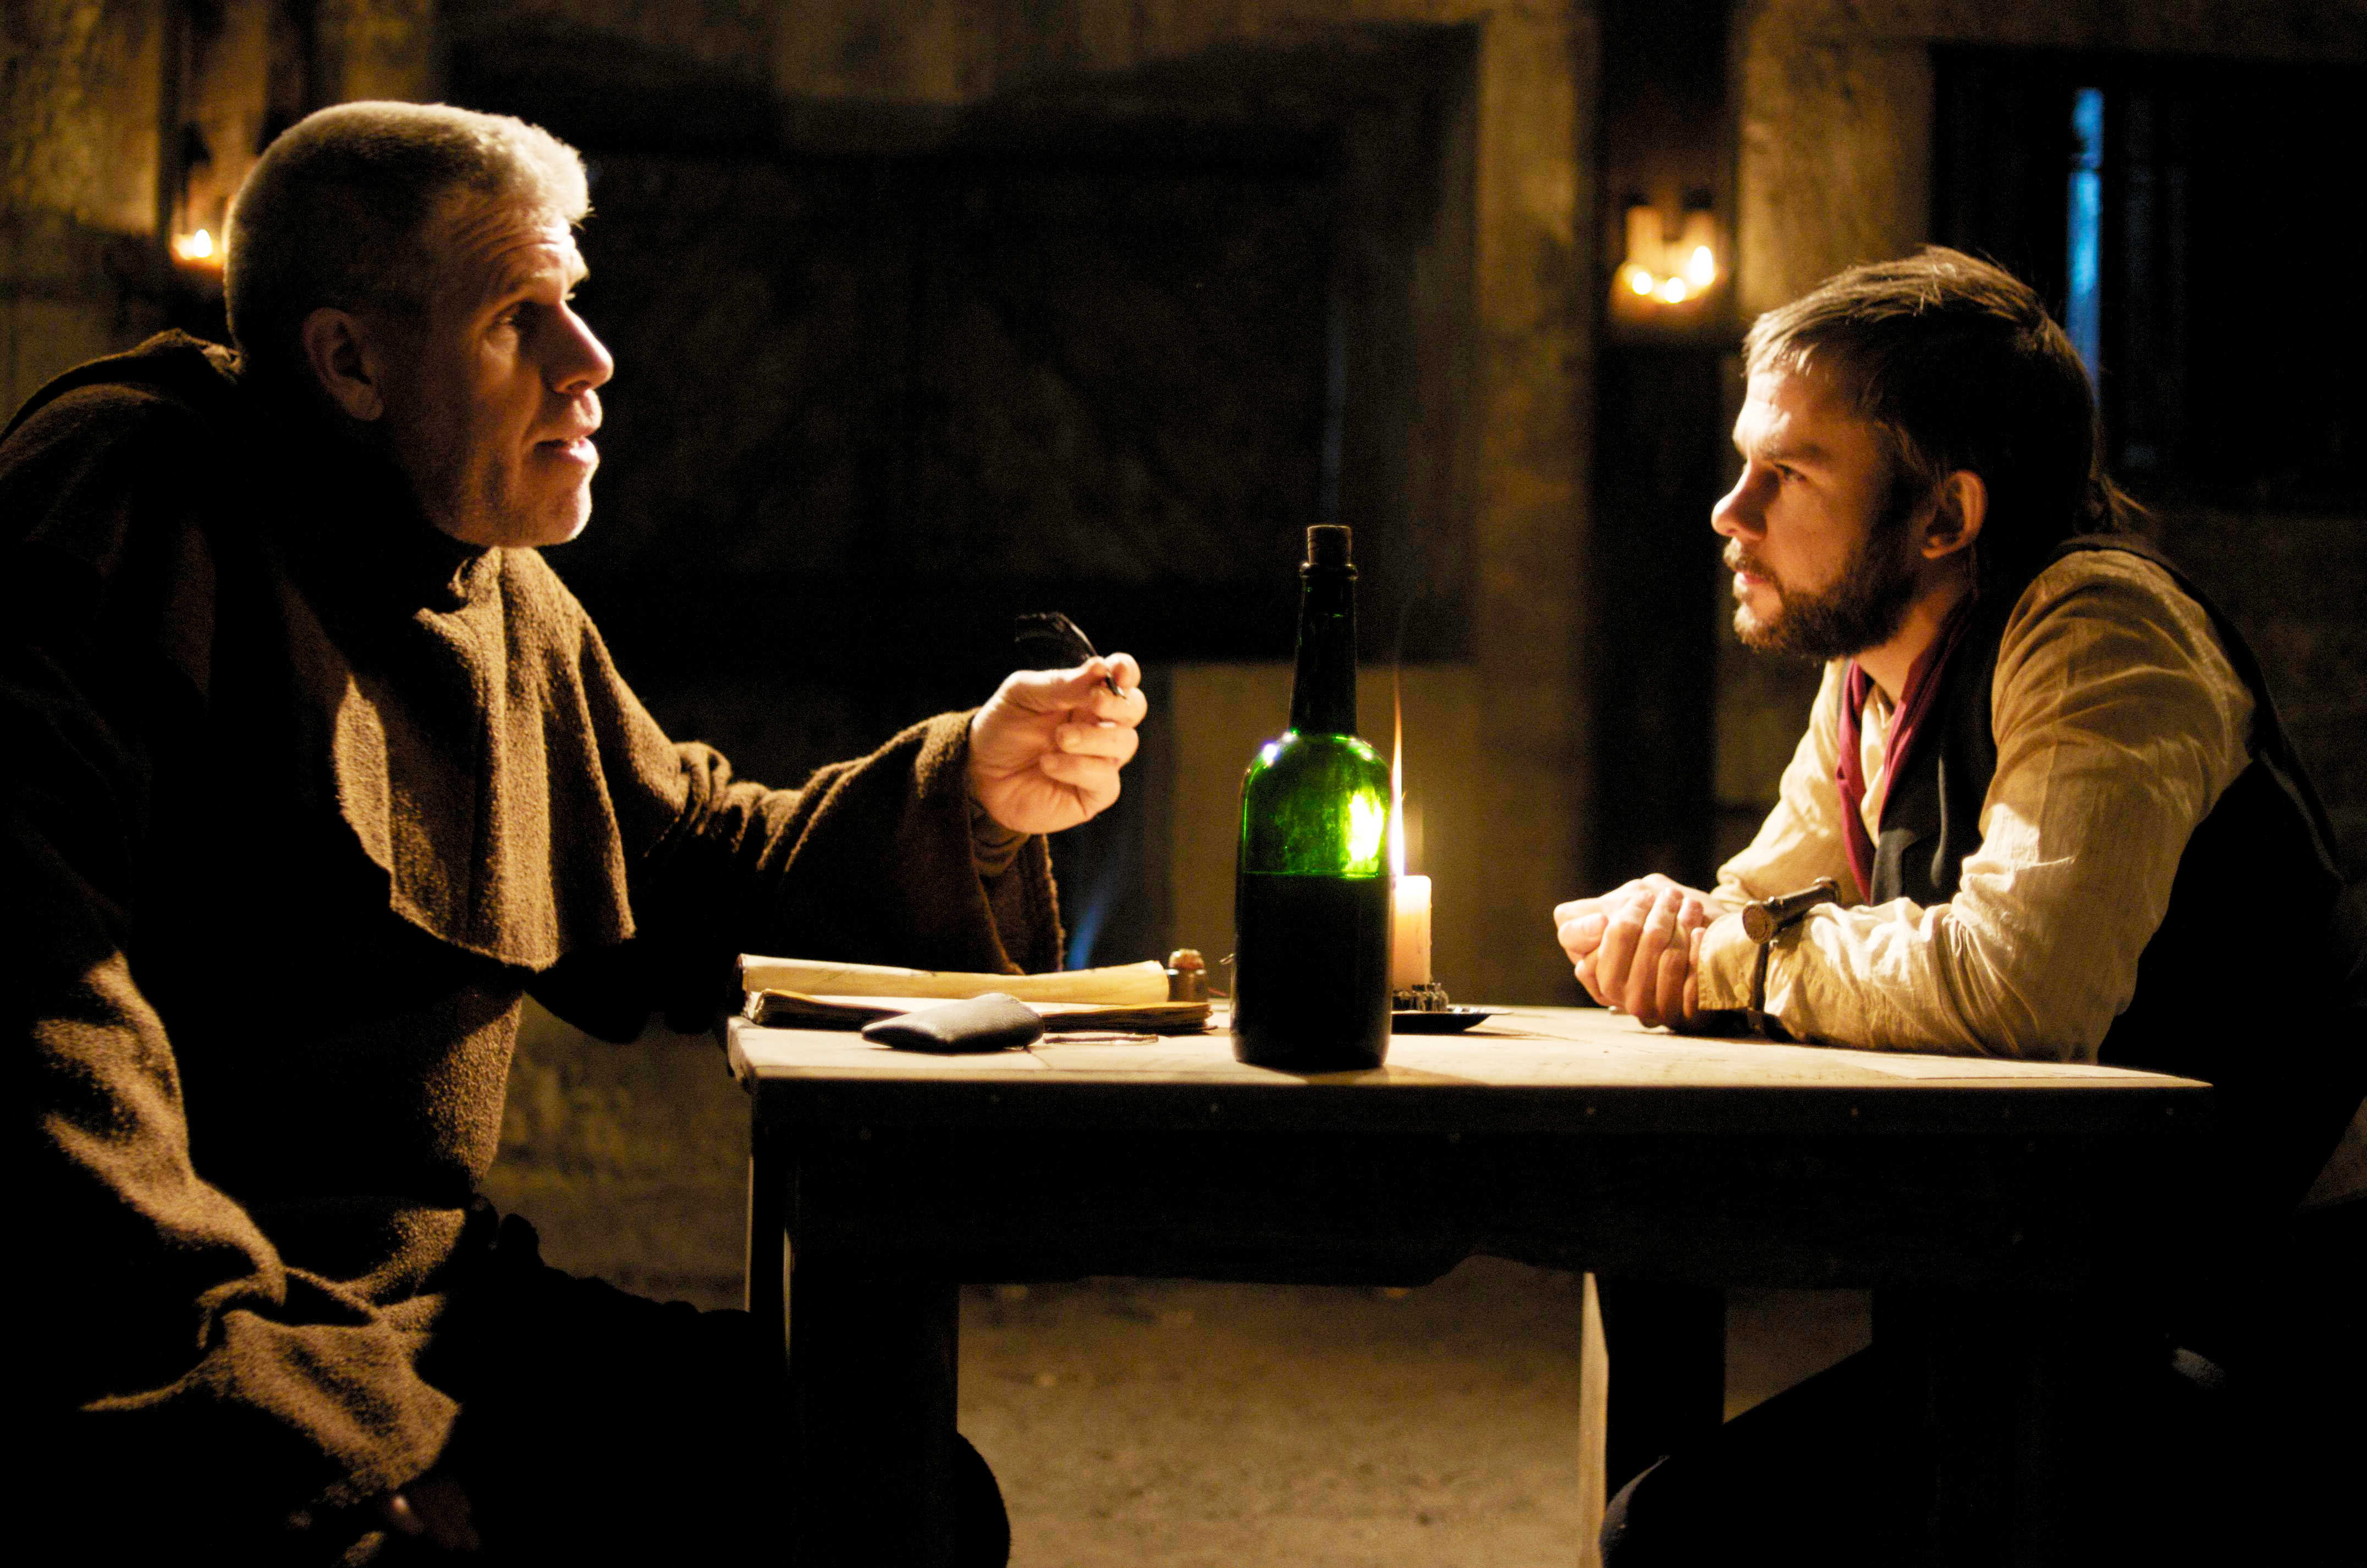 Ron Perlman stars as Priest and Dominic Monaghan stars as Arthur Blake in IFC Films' I Sell the Dead (2009)